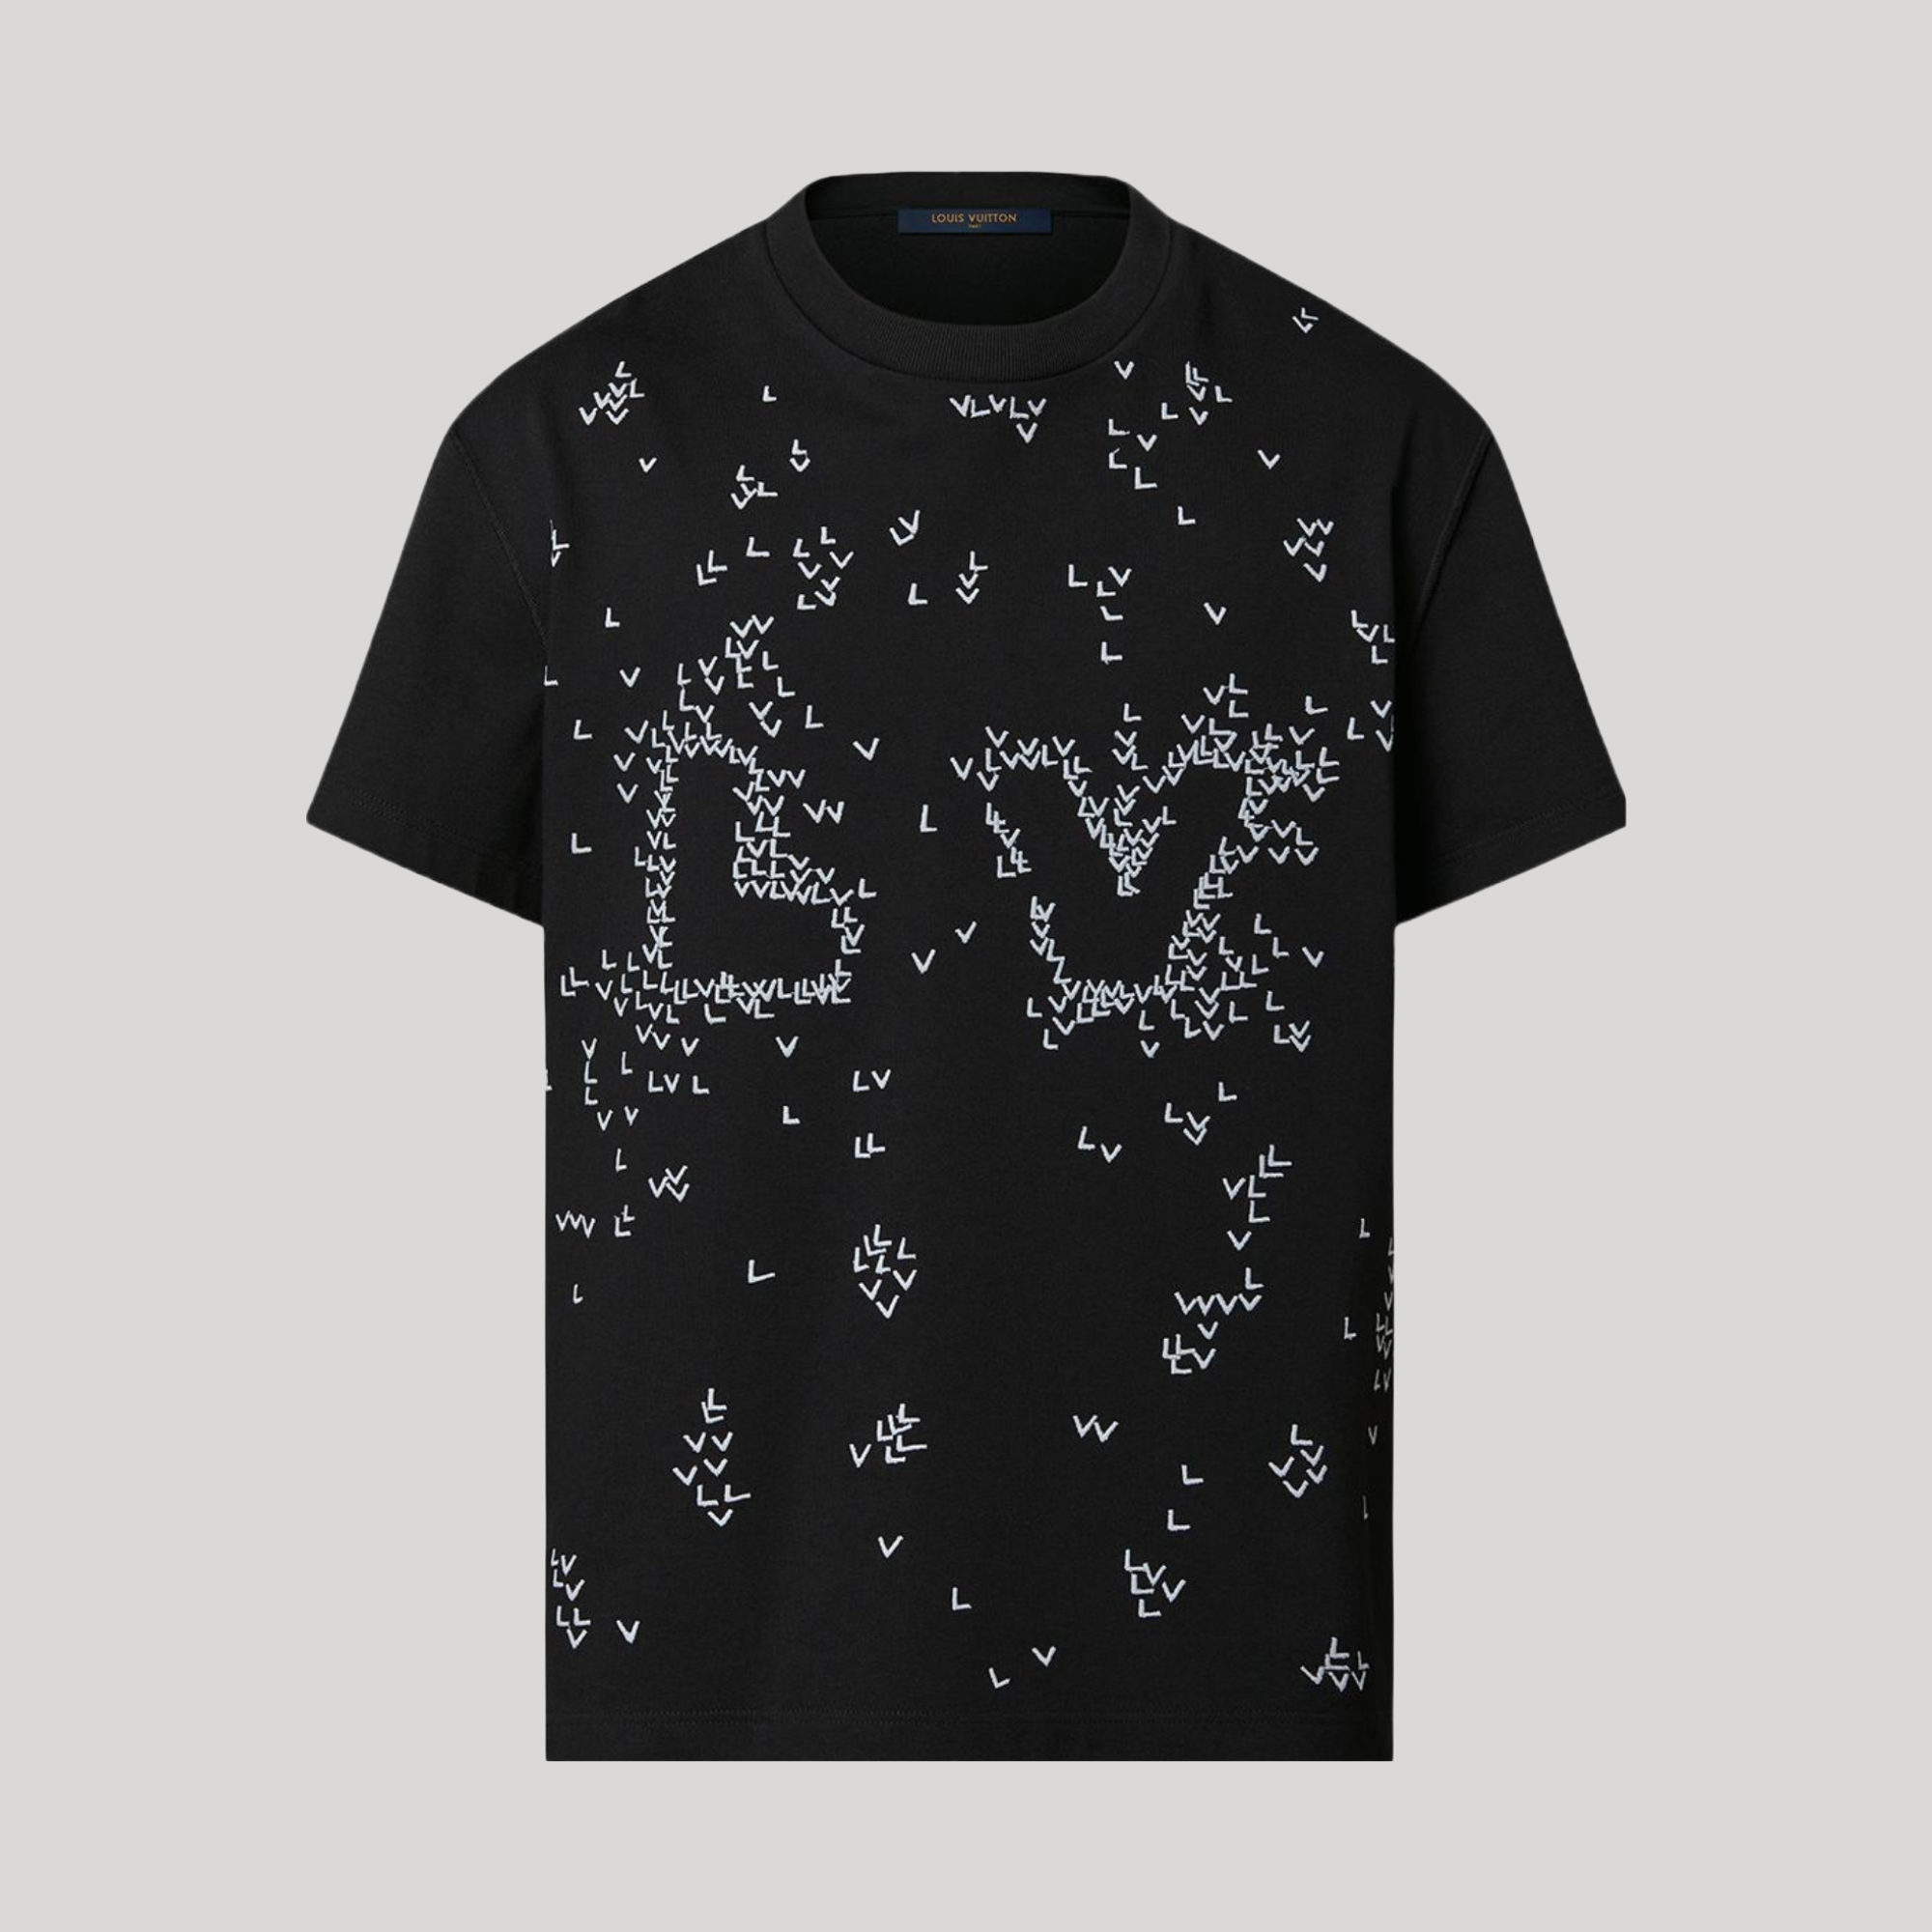 LOUIS VUITTON LV SPREAD EMBROIDERY T-SHIRT